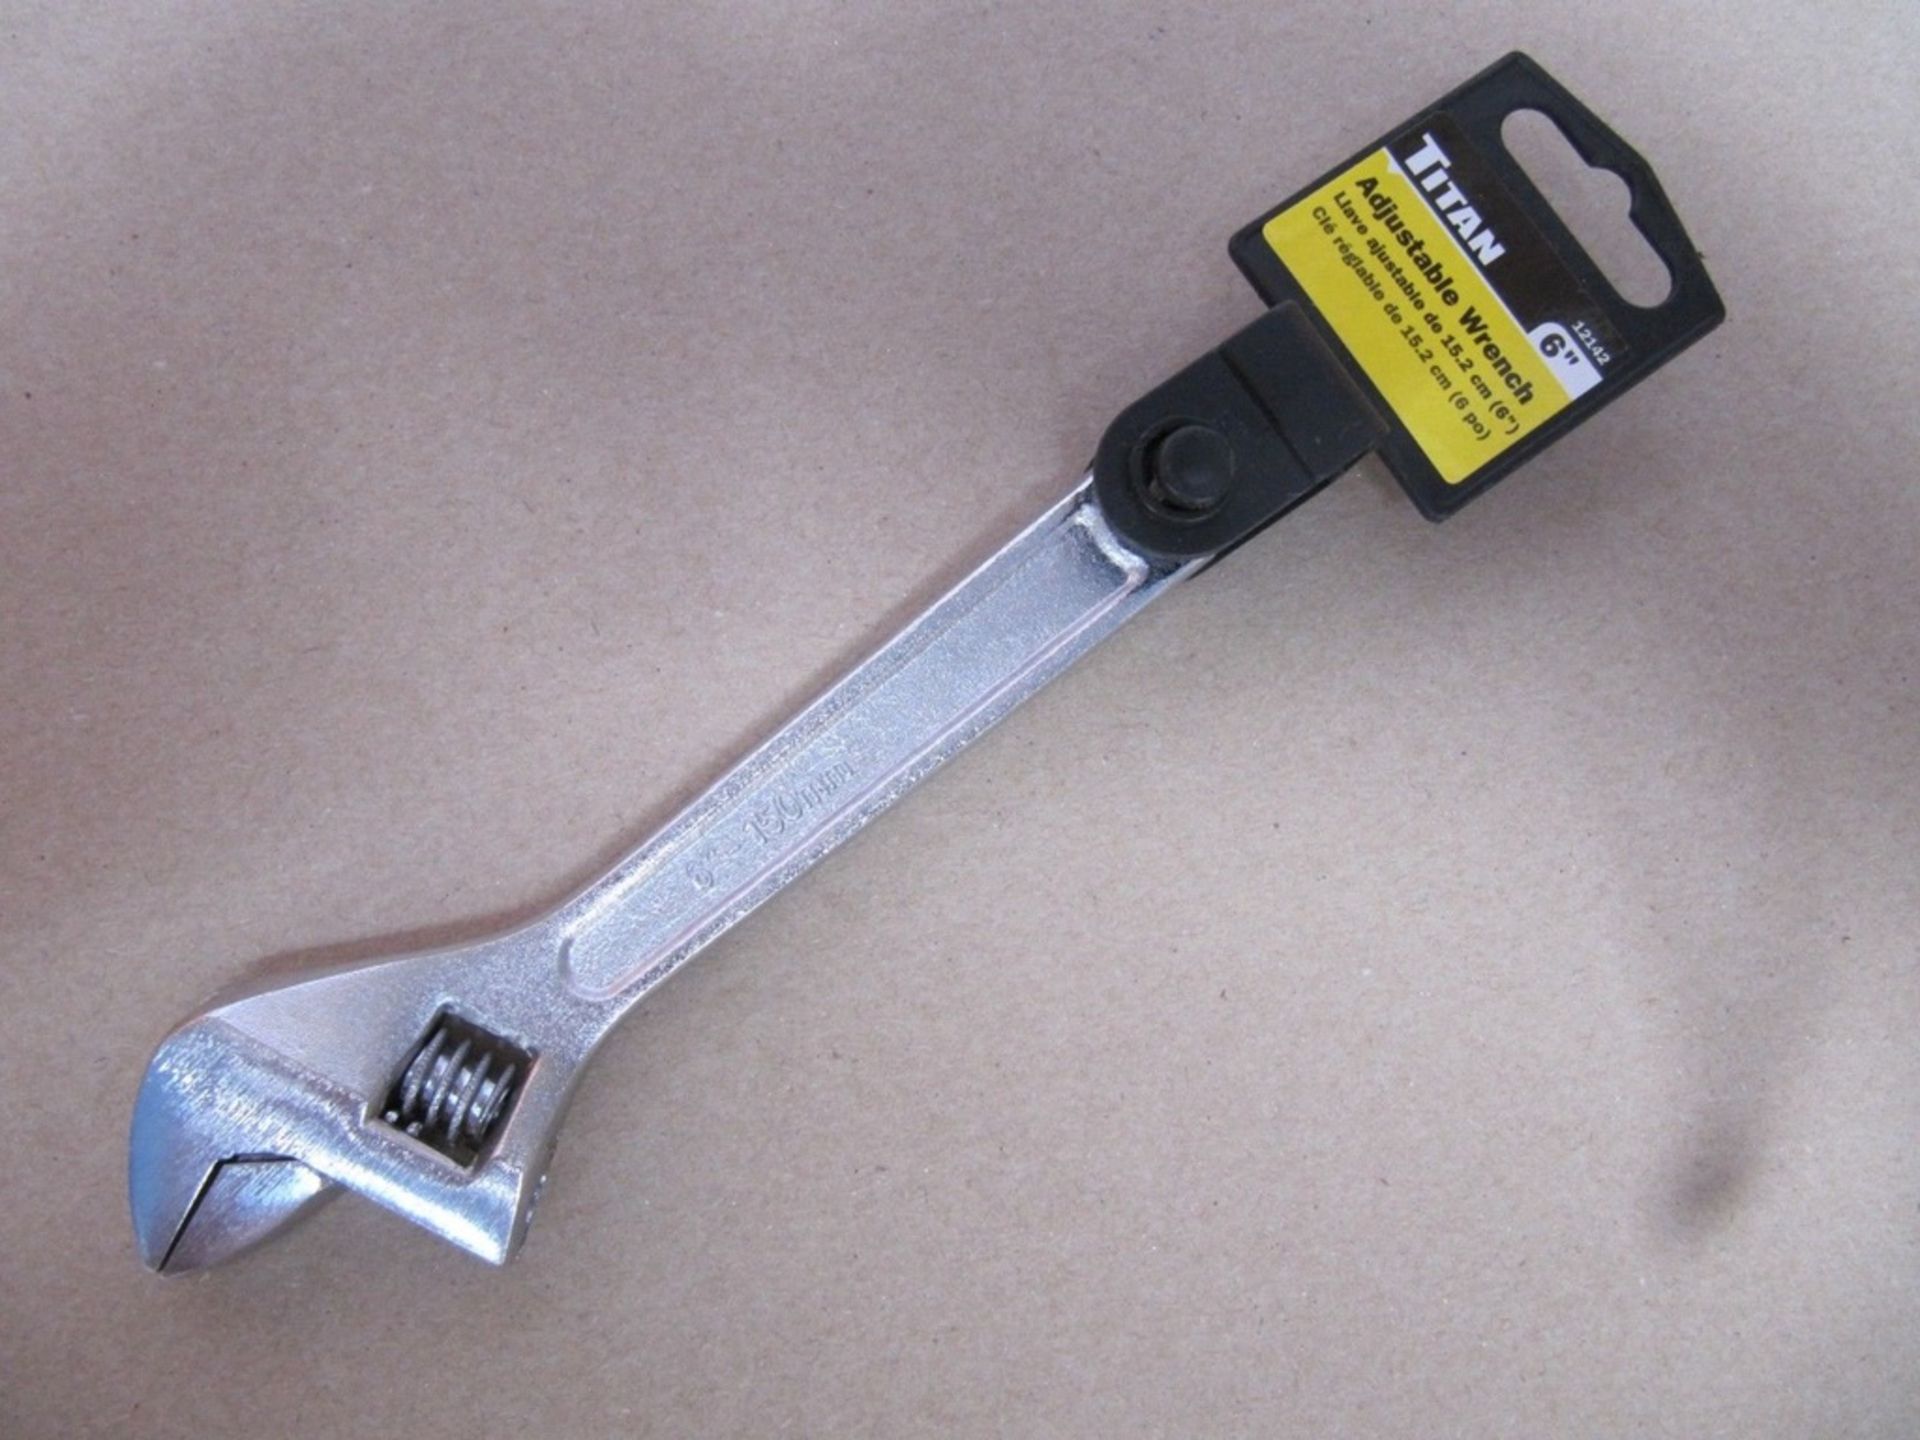 10 x Titan Tools 6 inch Adjustable Wrench. 12142 no vat on hammer.You will get 10 of these.Semi